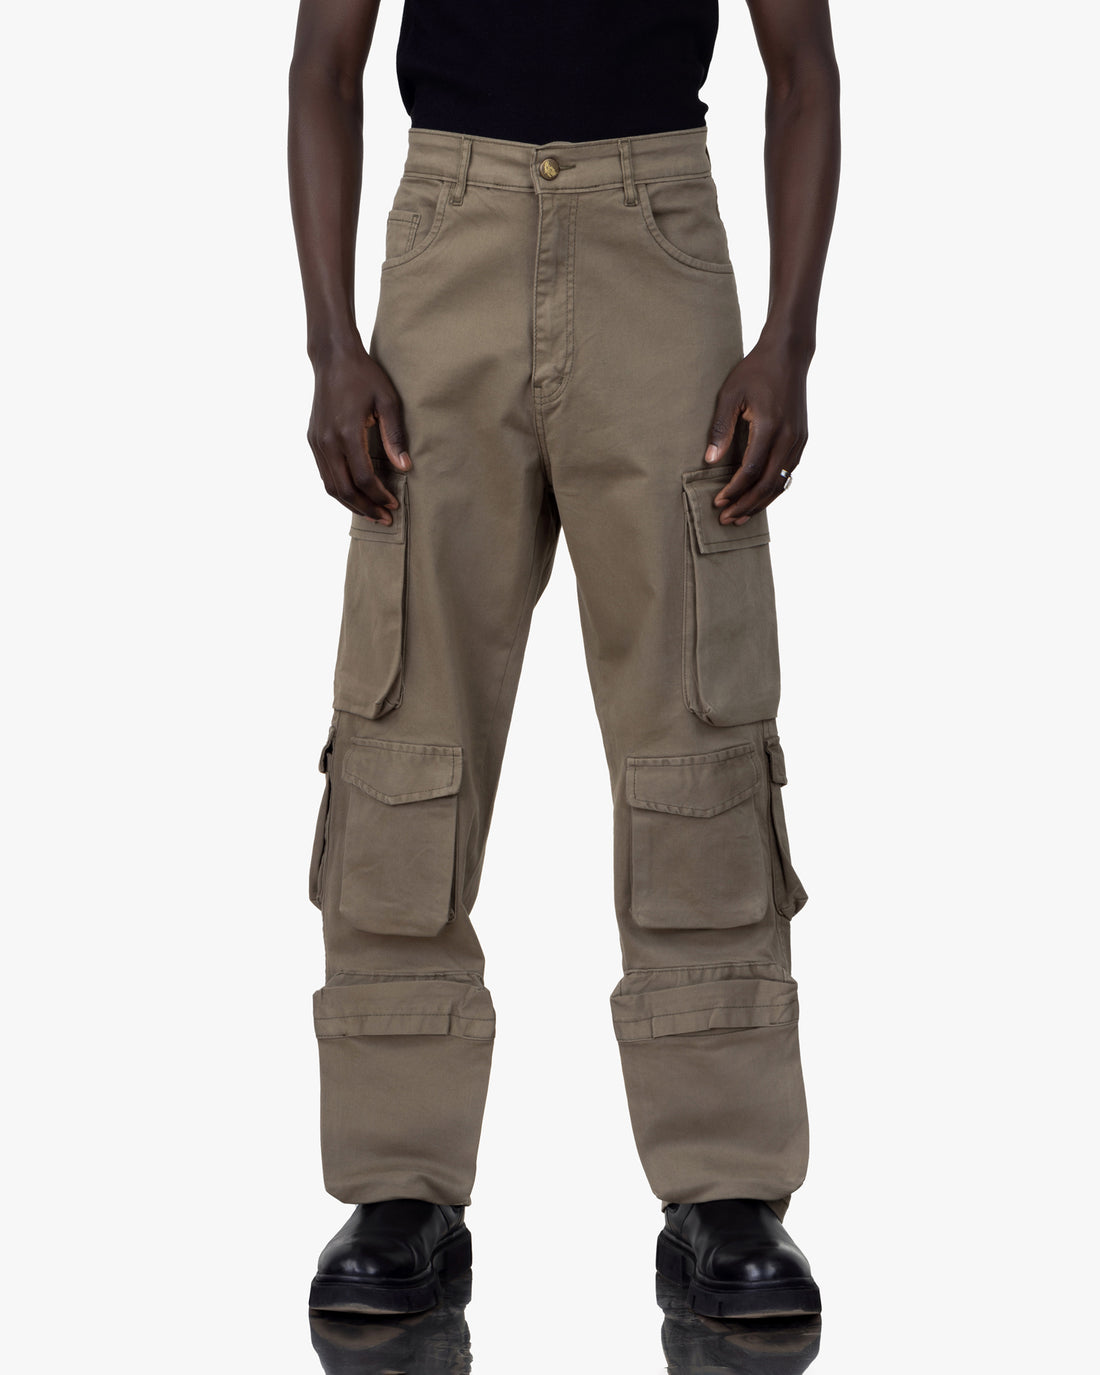 Cargo With 6 Pockets